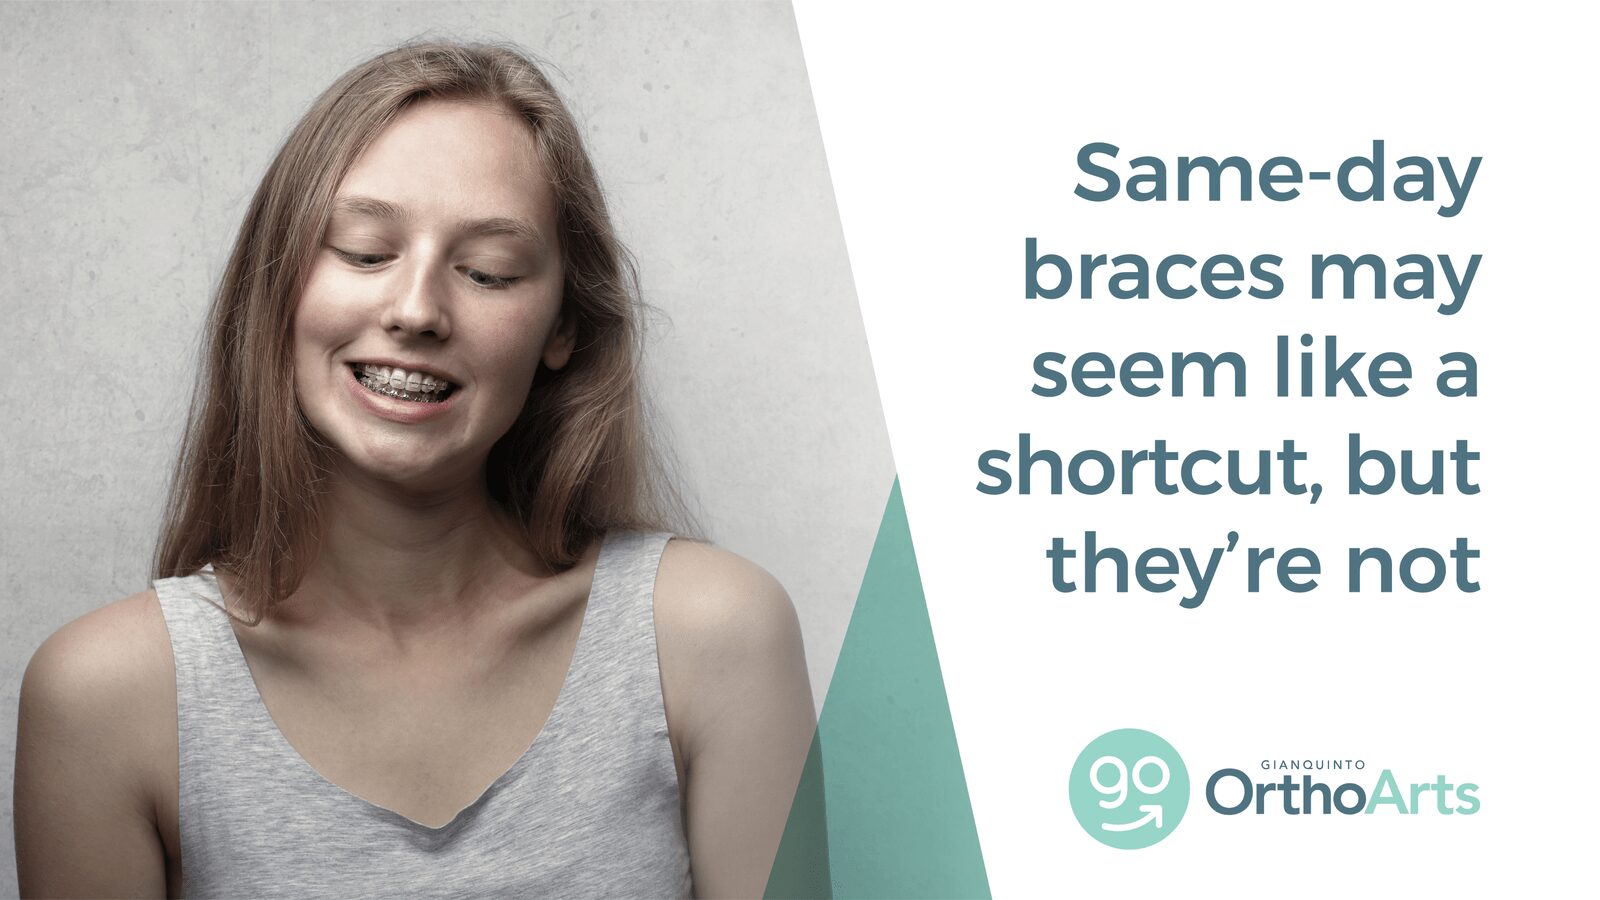 Same-Day Braces May Seem Like a Shortcut, But They’re Not